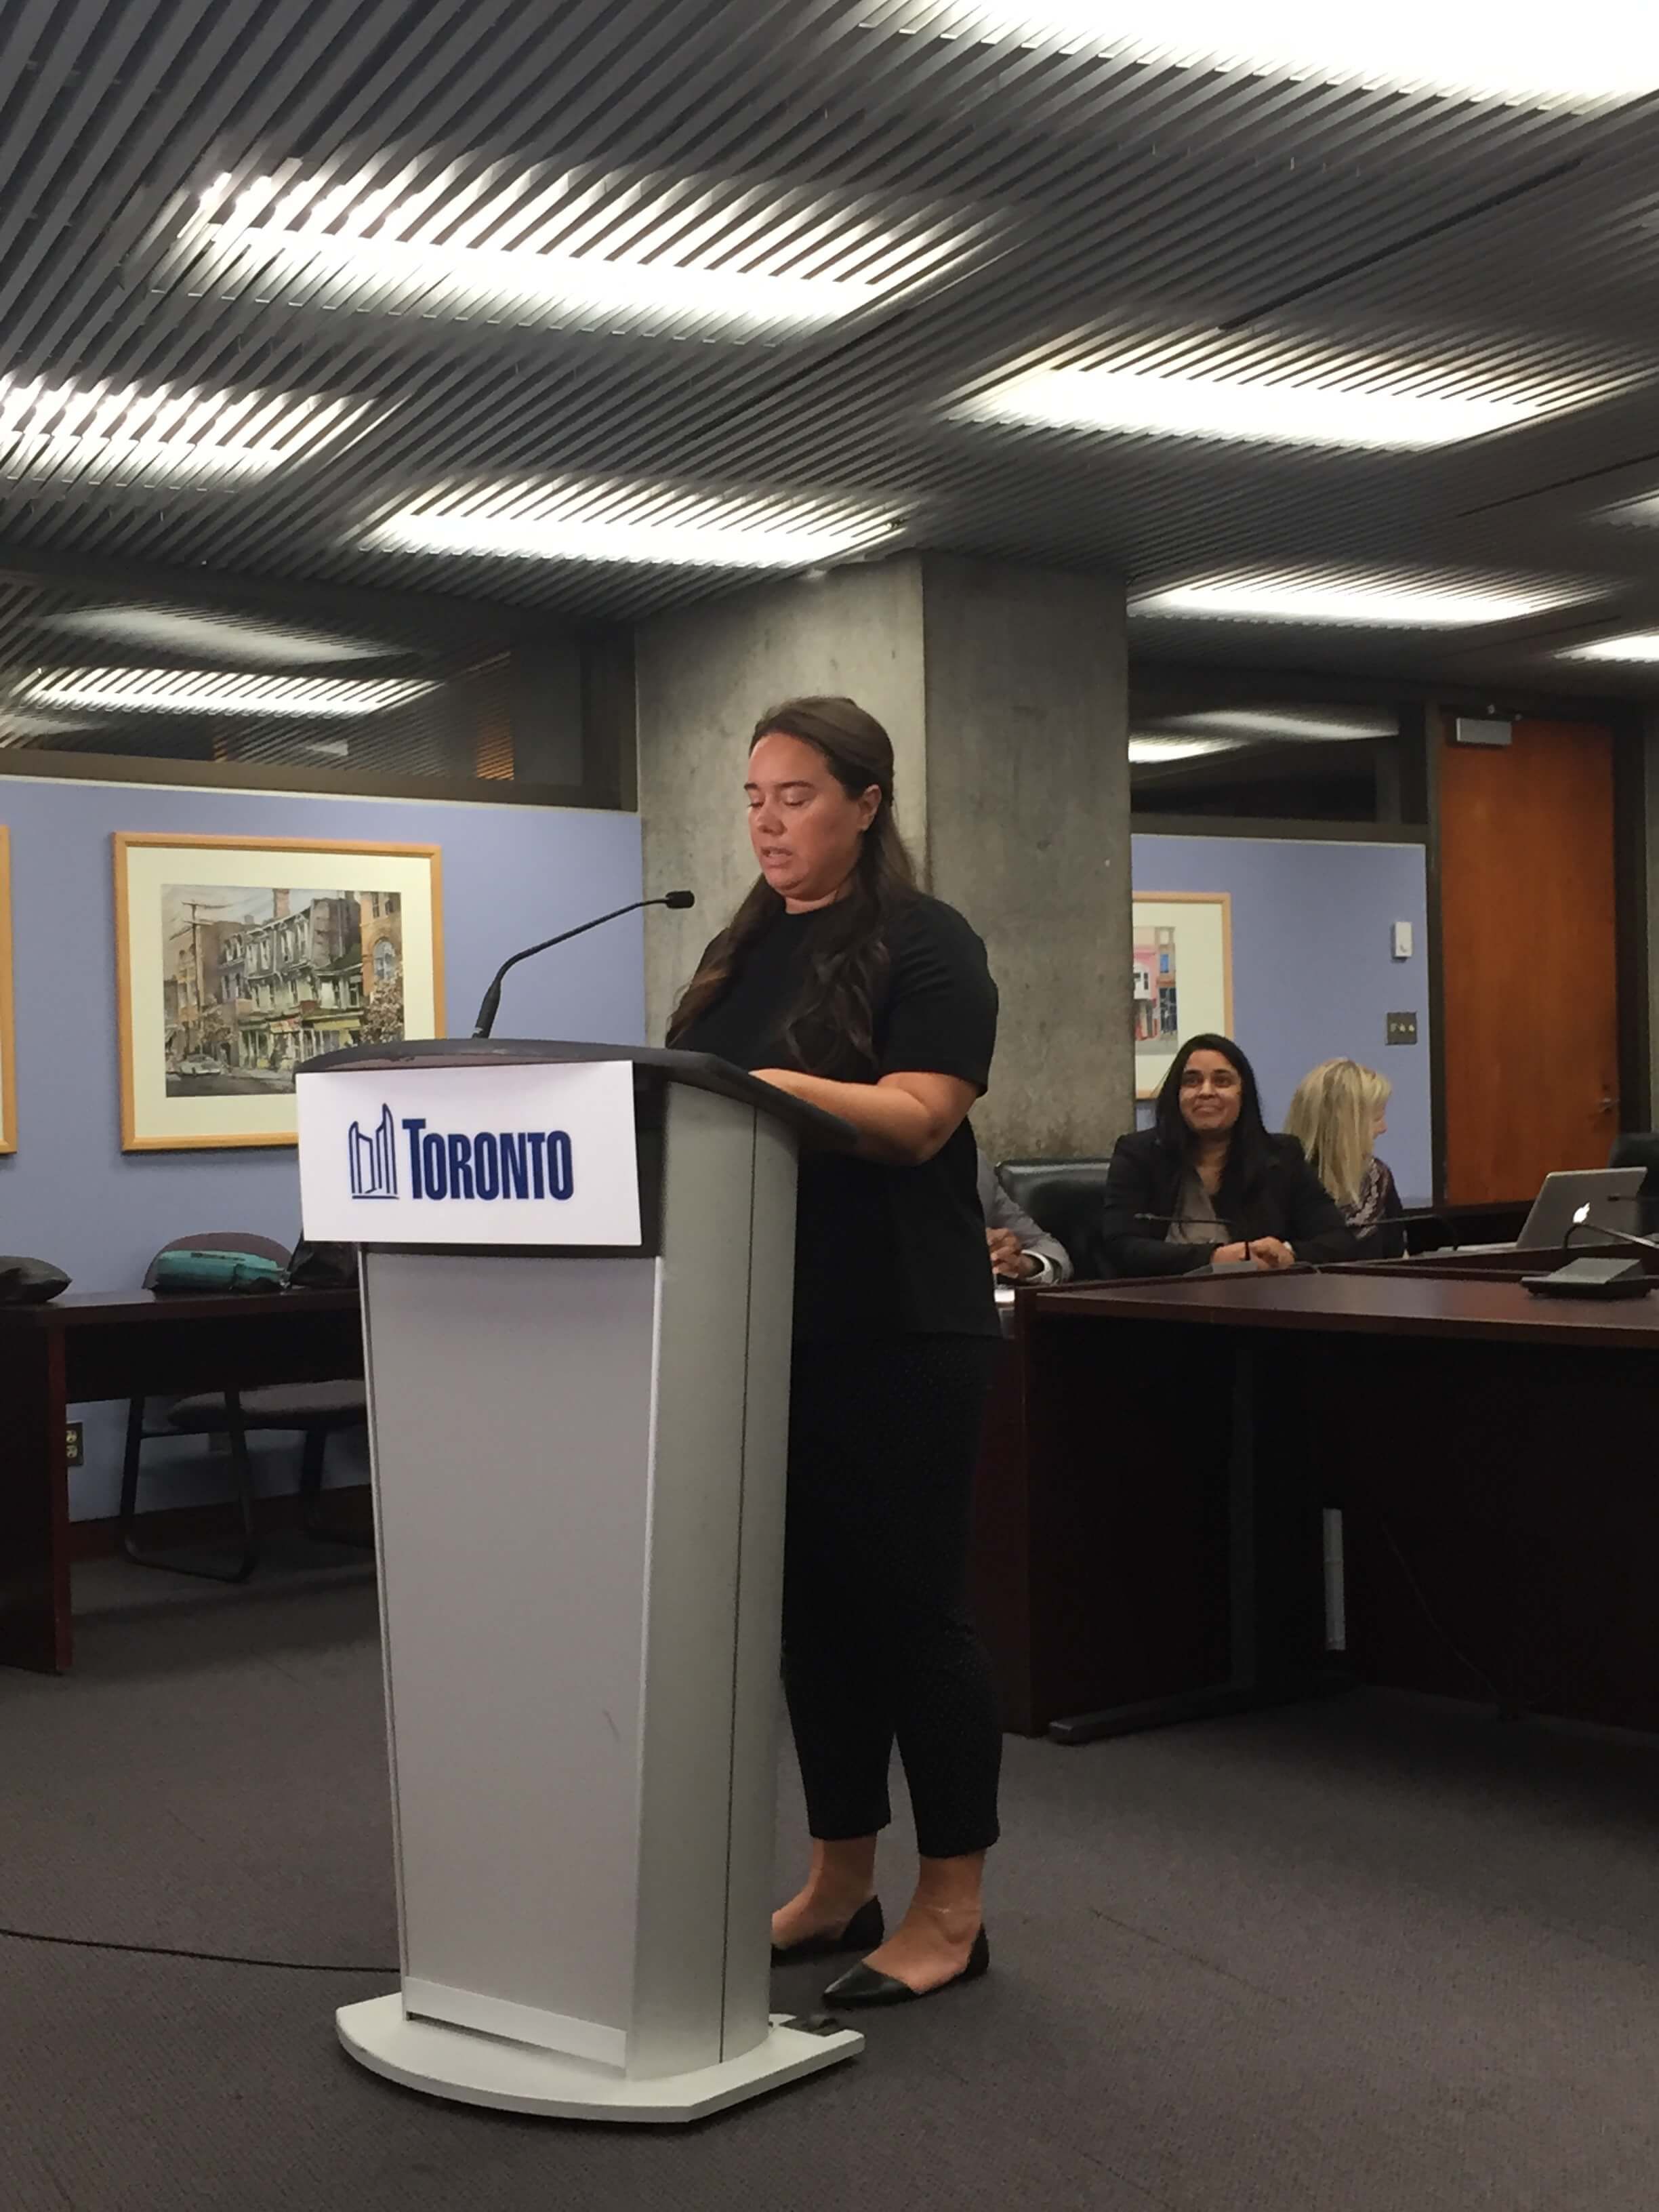 Amadeusz participates in a press conference regarding gun violence in the City of Toronto in 2018